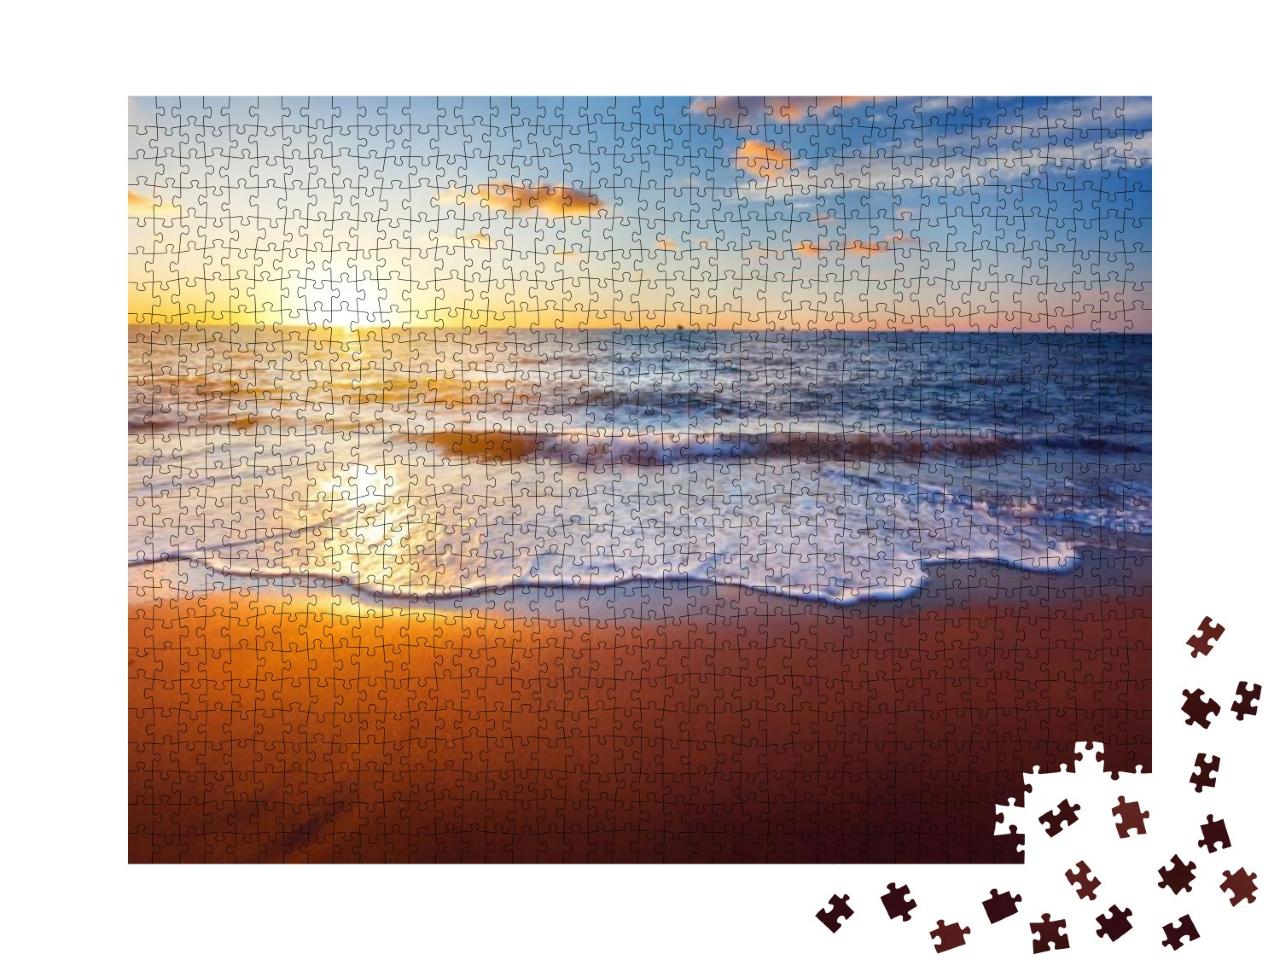 Sunset & Beach... Jigsaw Puzzle with 1000 pieces